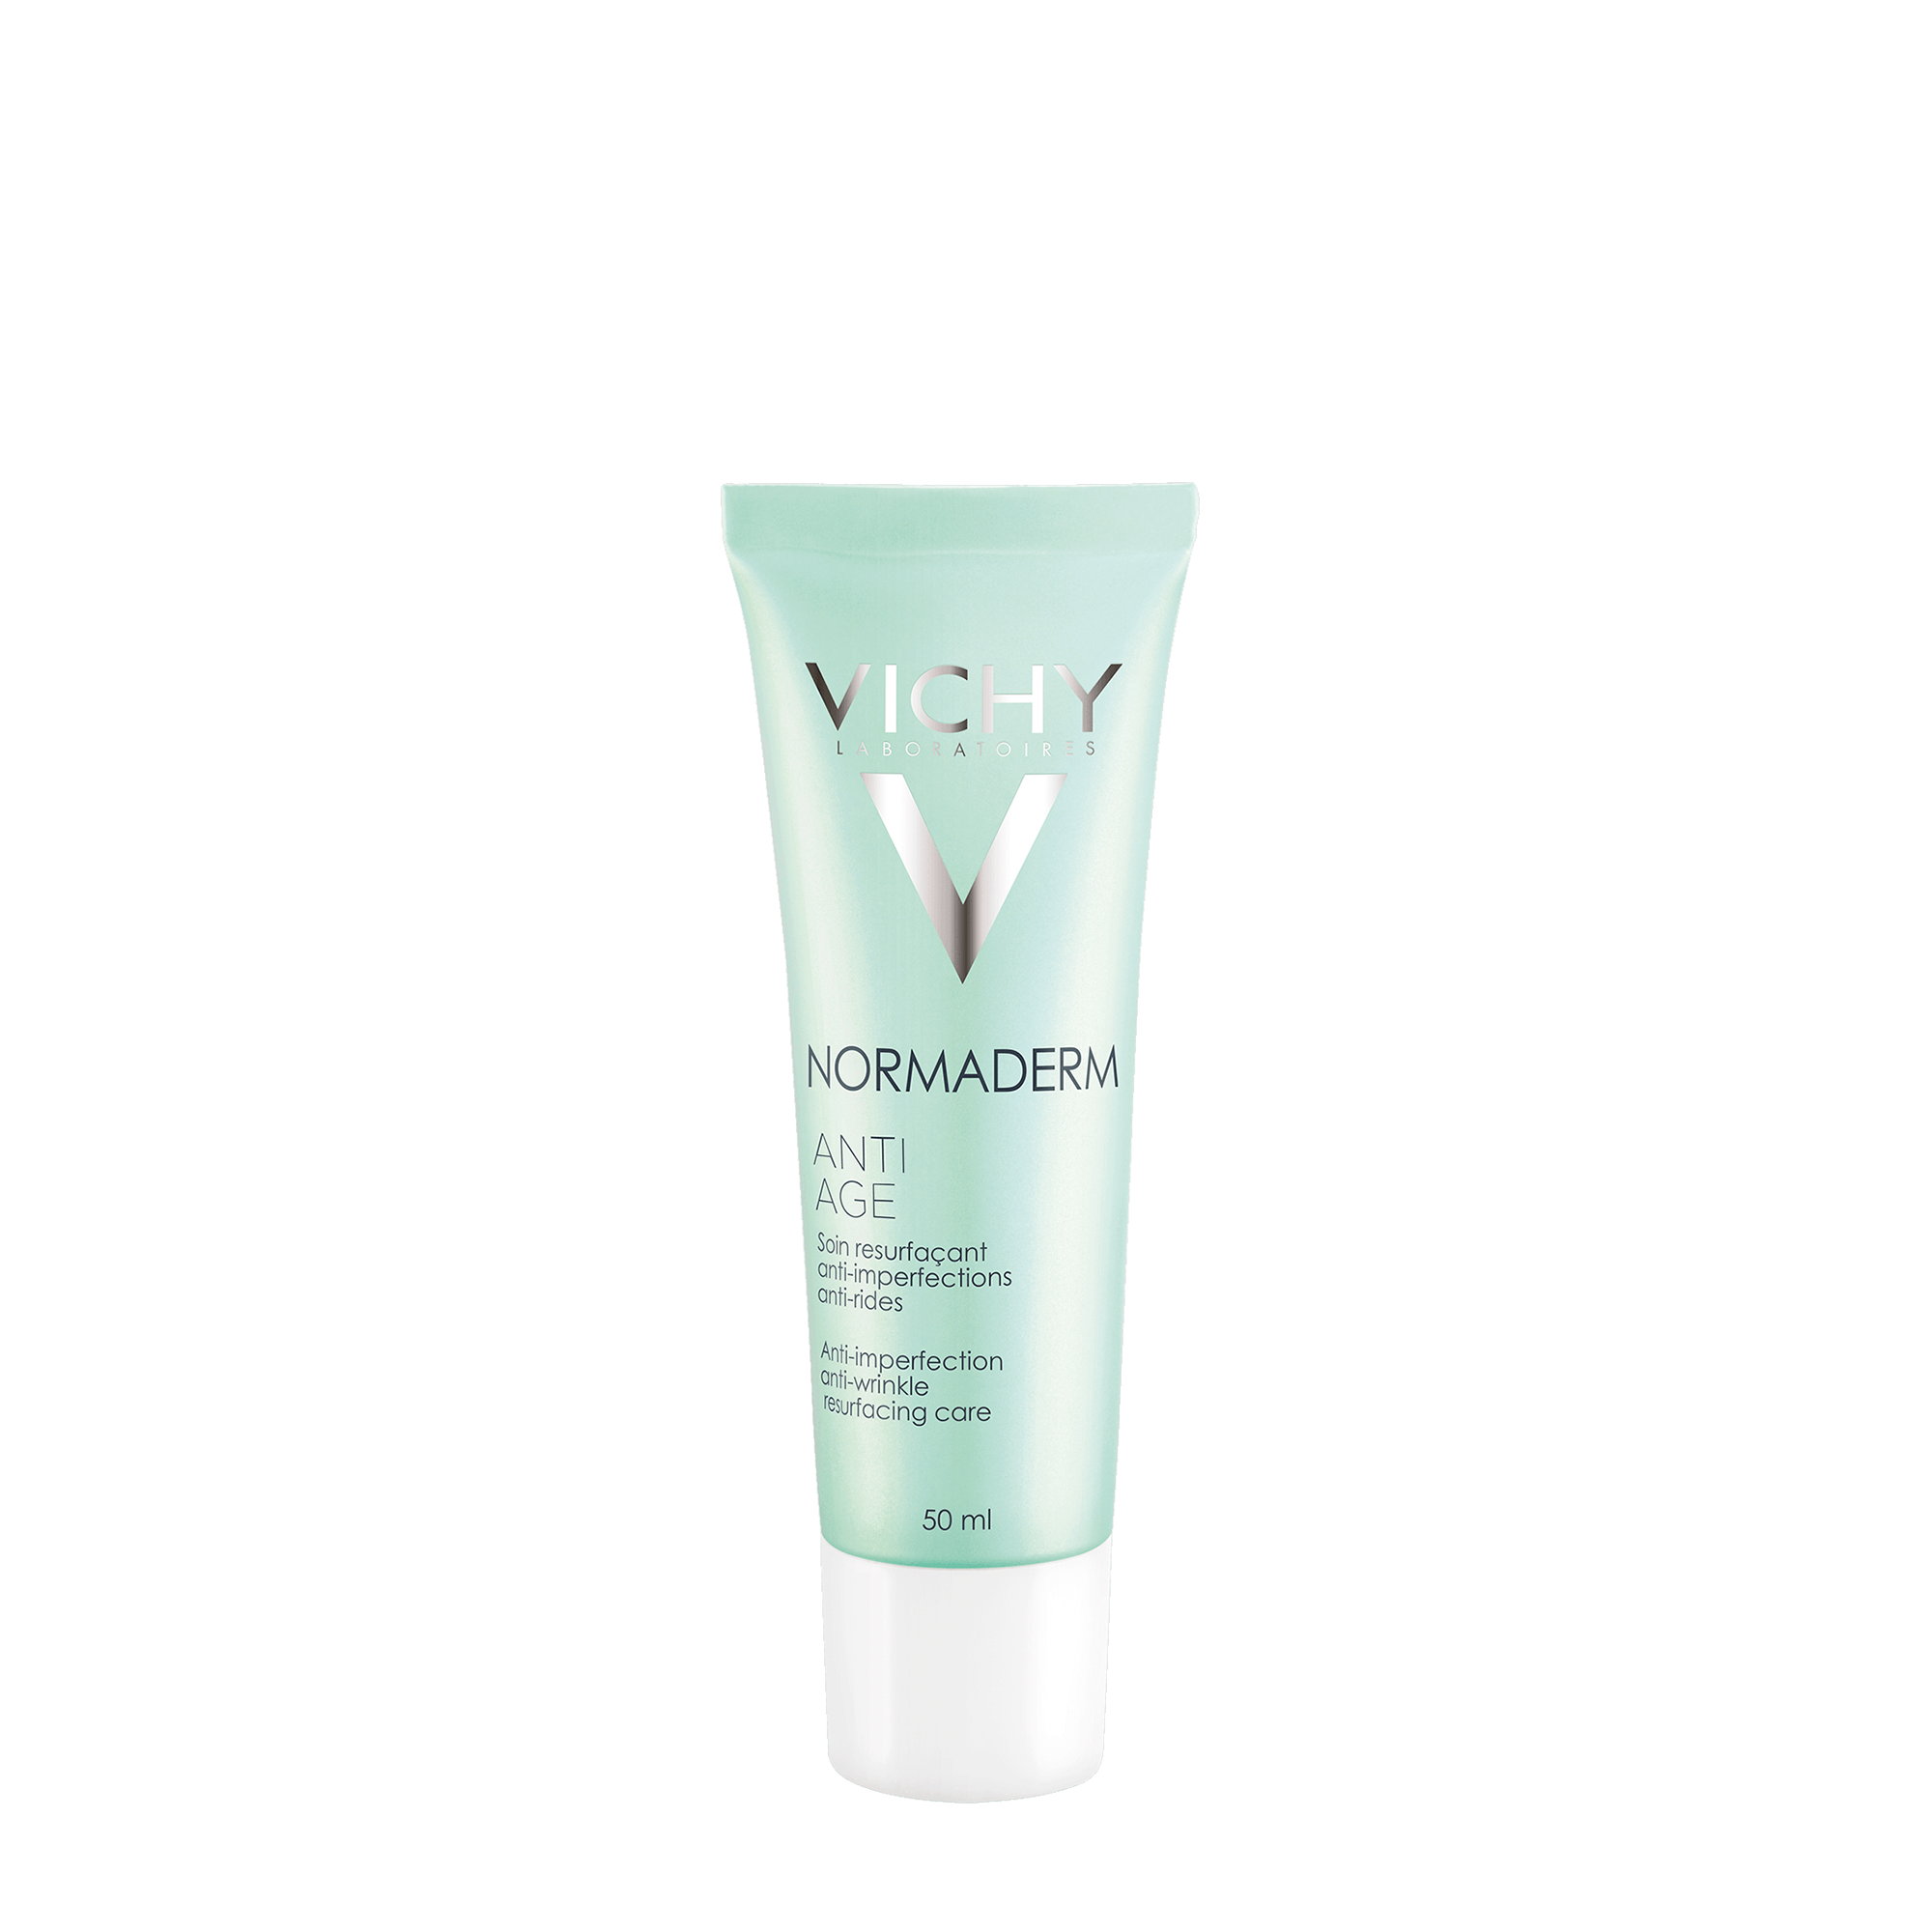 vichy normaderm anti age tagespflege)